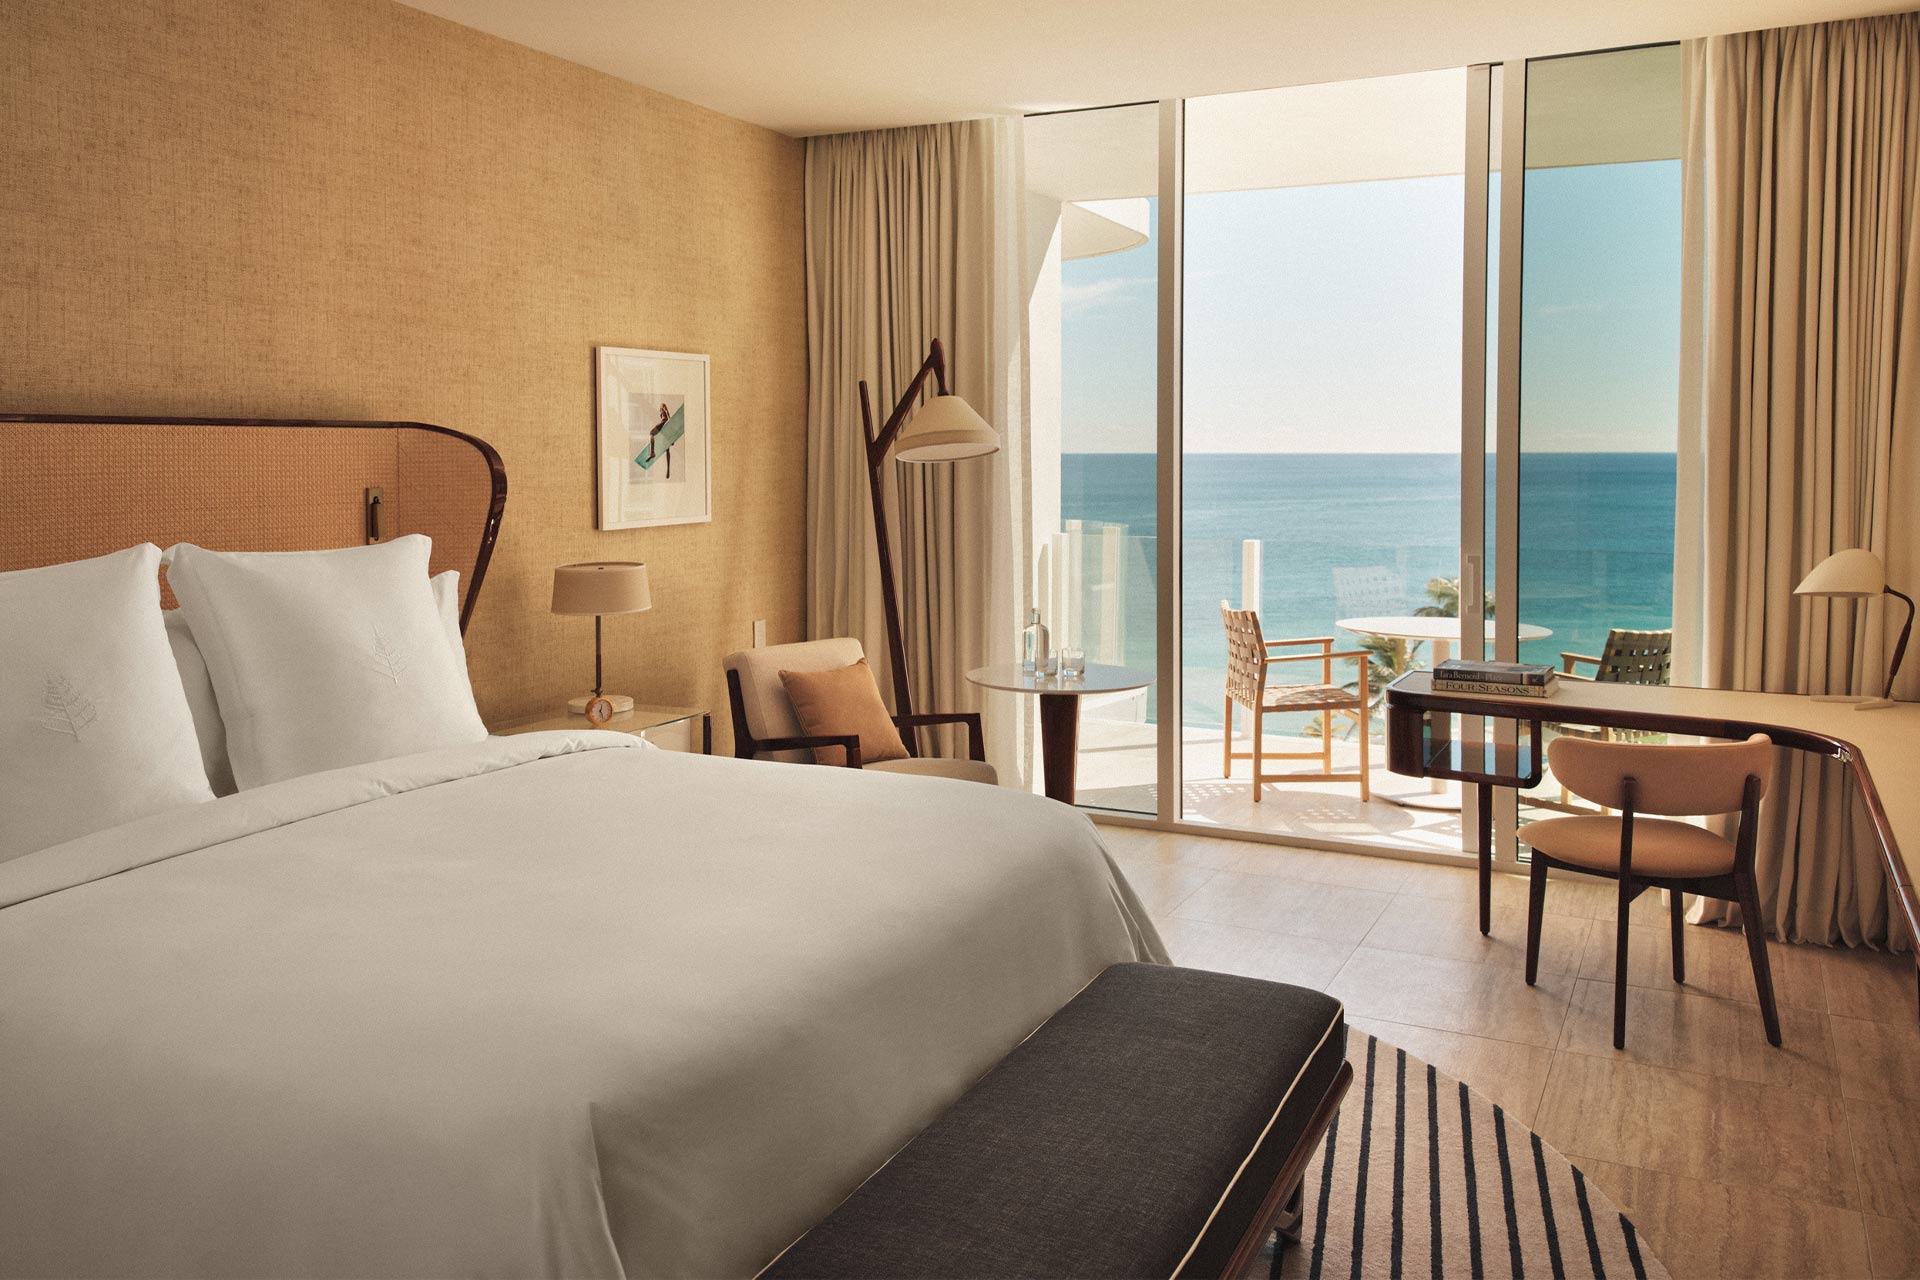 A guestroom at Four Seasons Fort Lauderdale in Florida